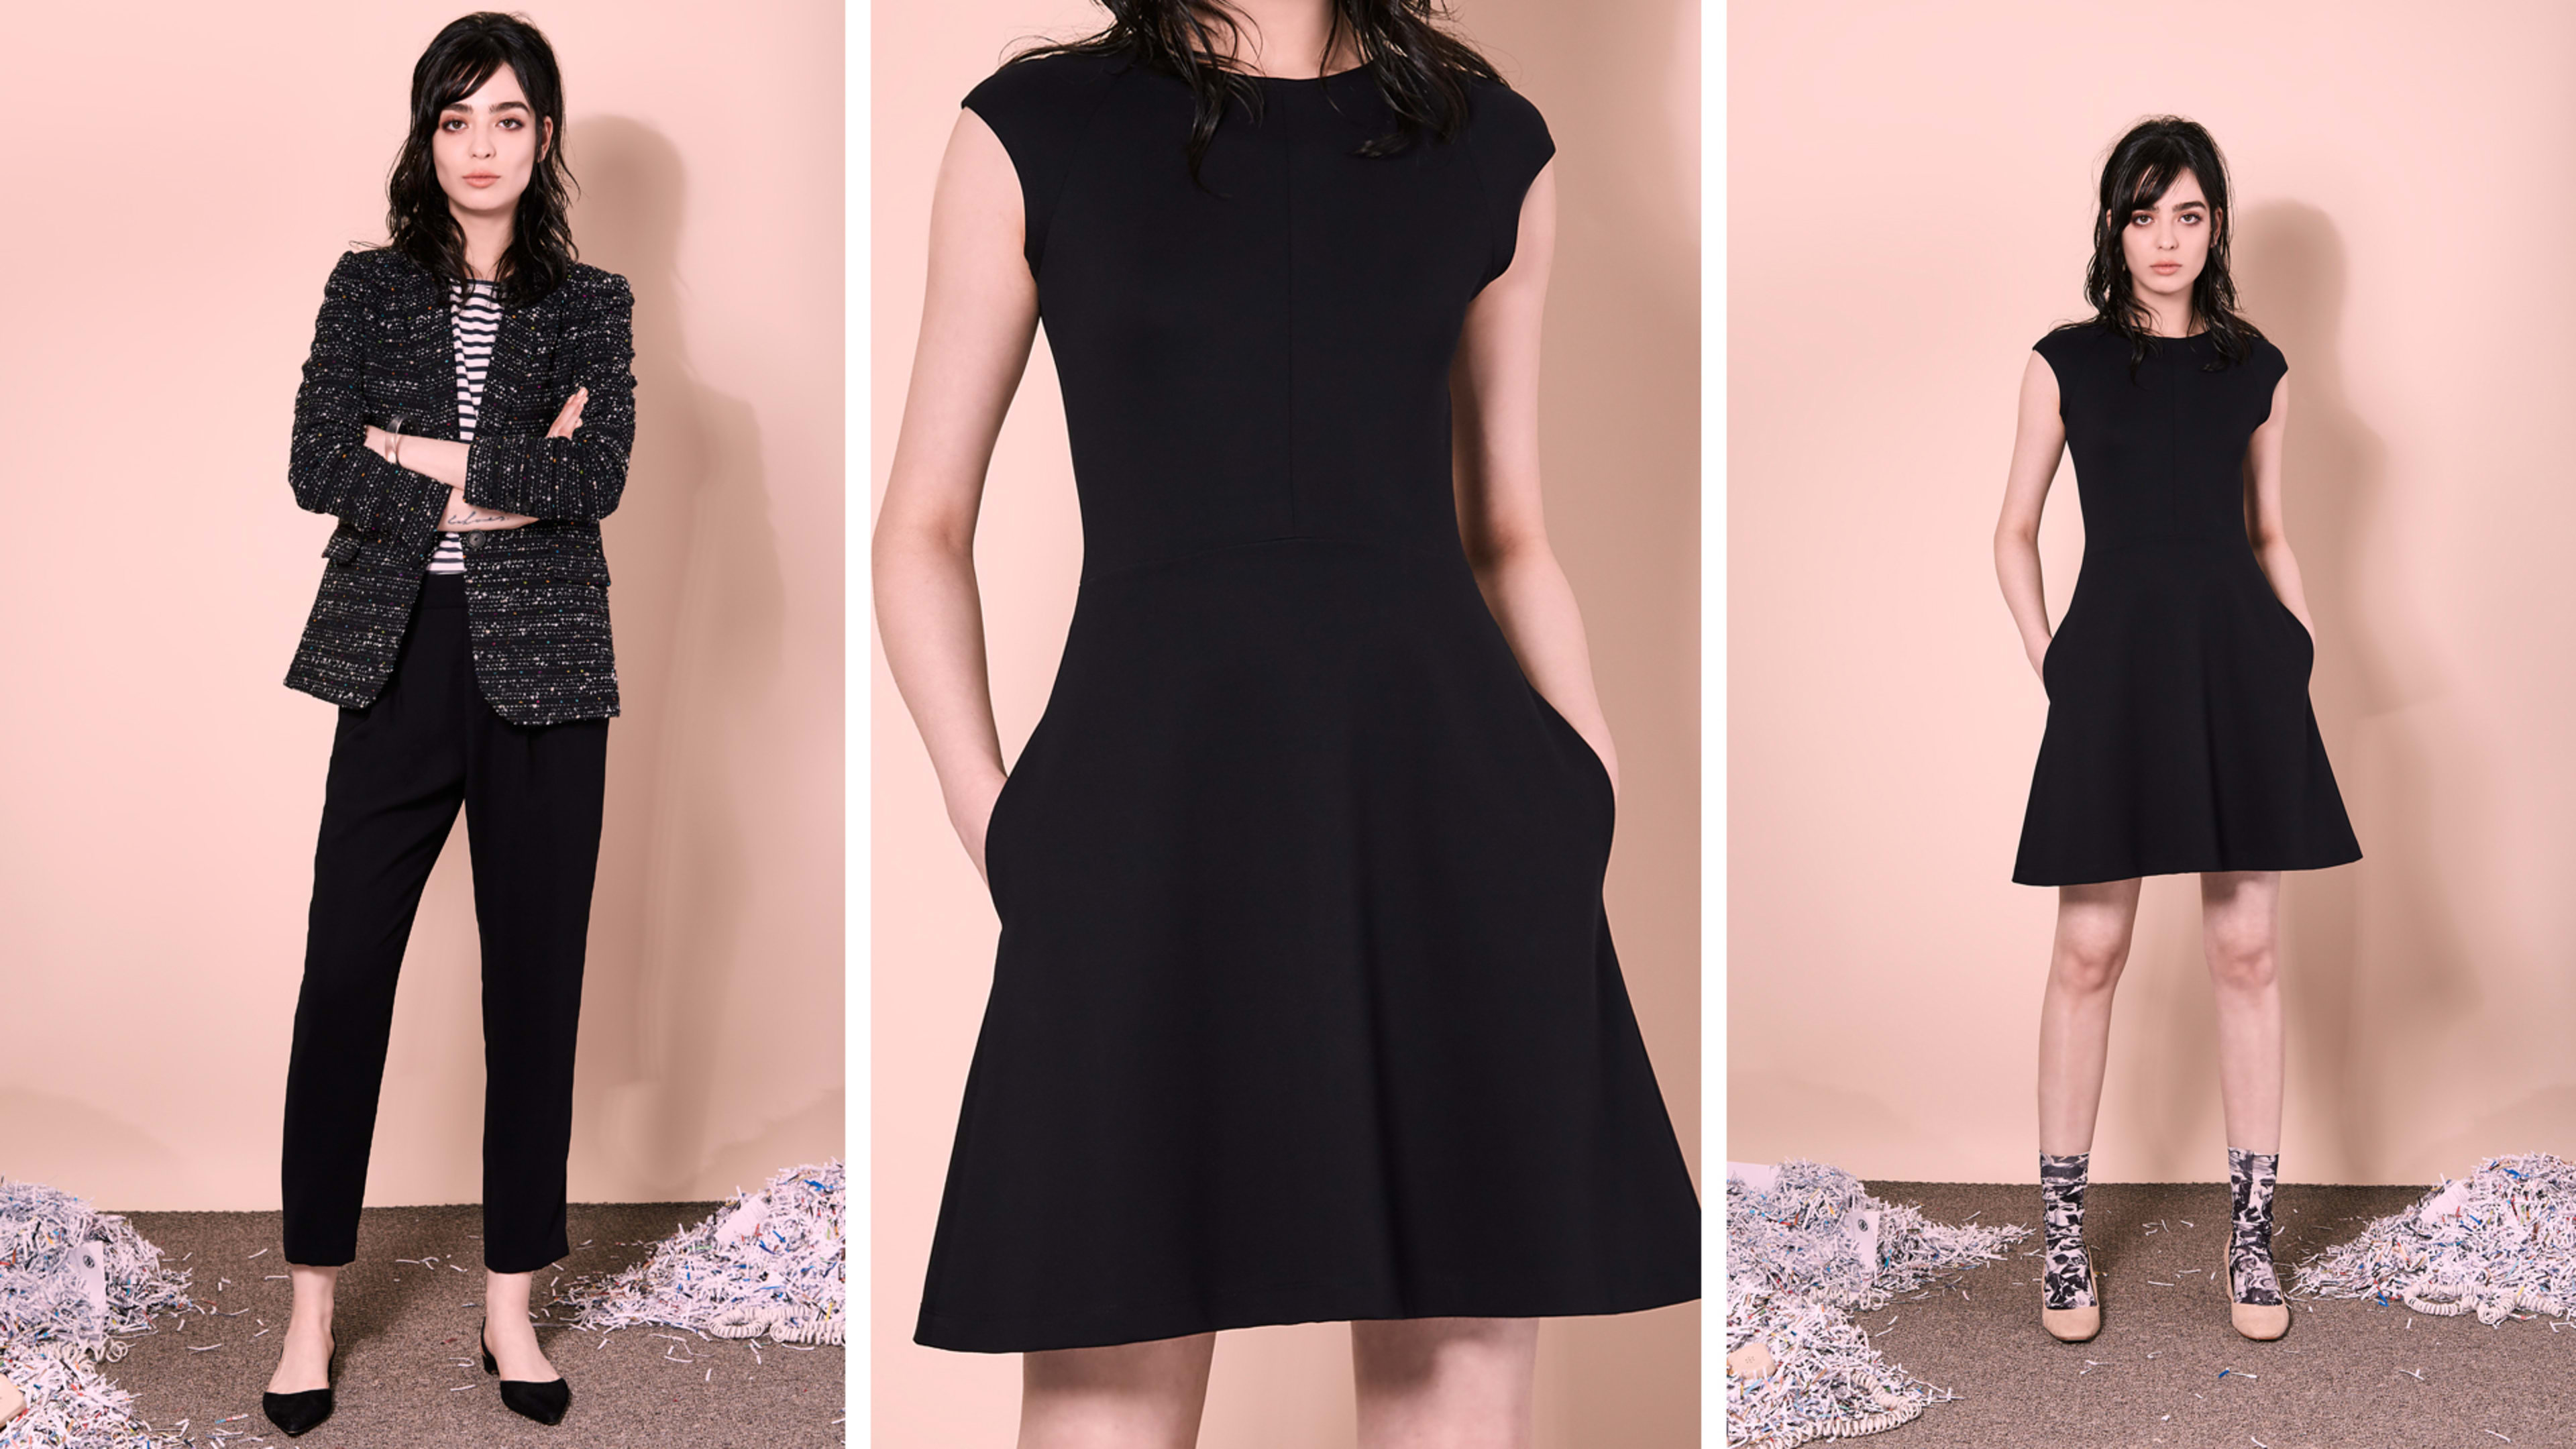 These 6 Women’s “Work Uniforms” Will Make Your Mornings Easier